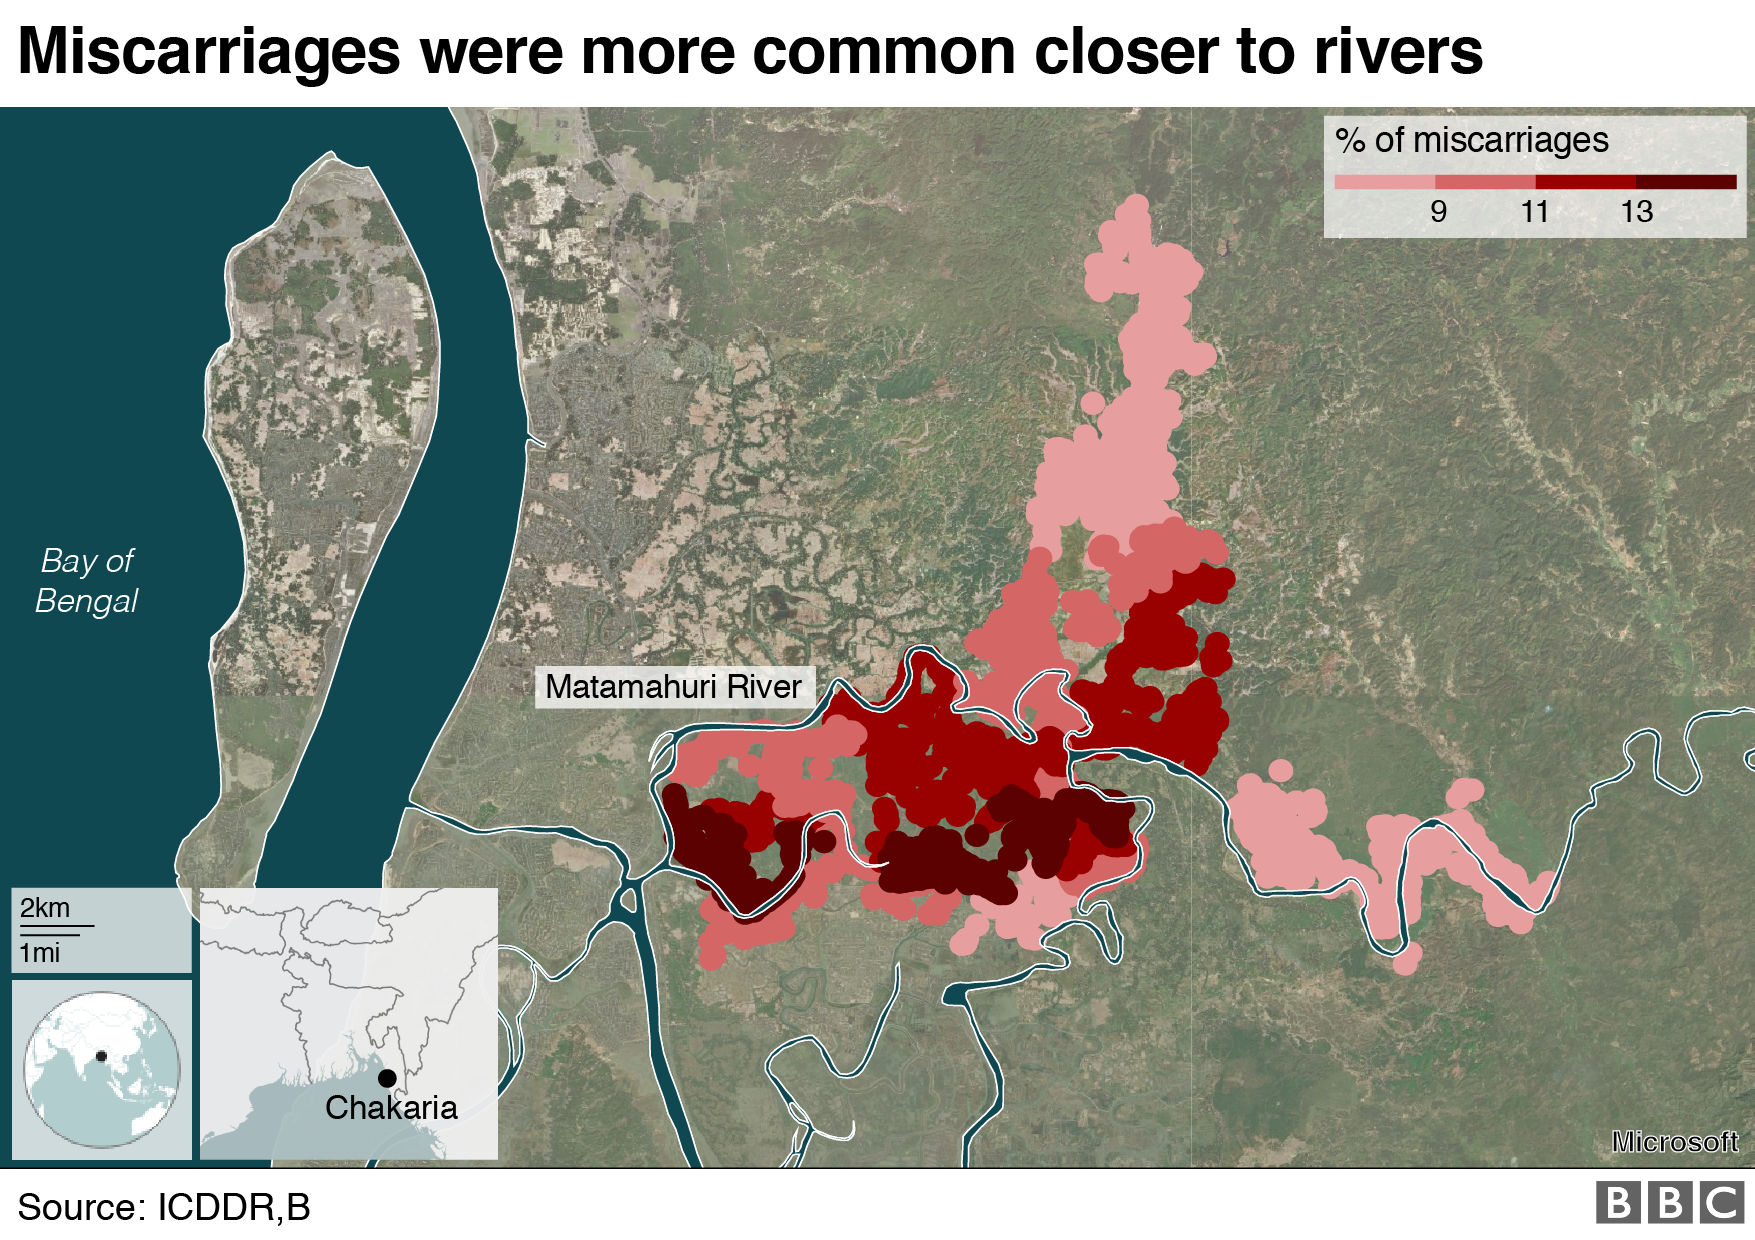 BBC Graphic of miscarriages that take place closer to rivers